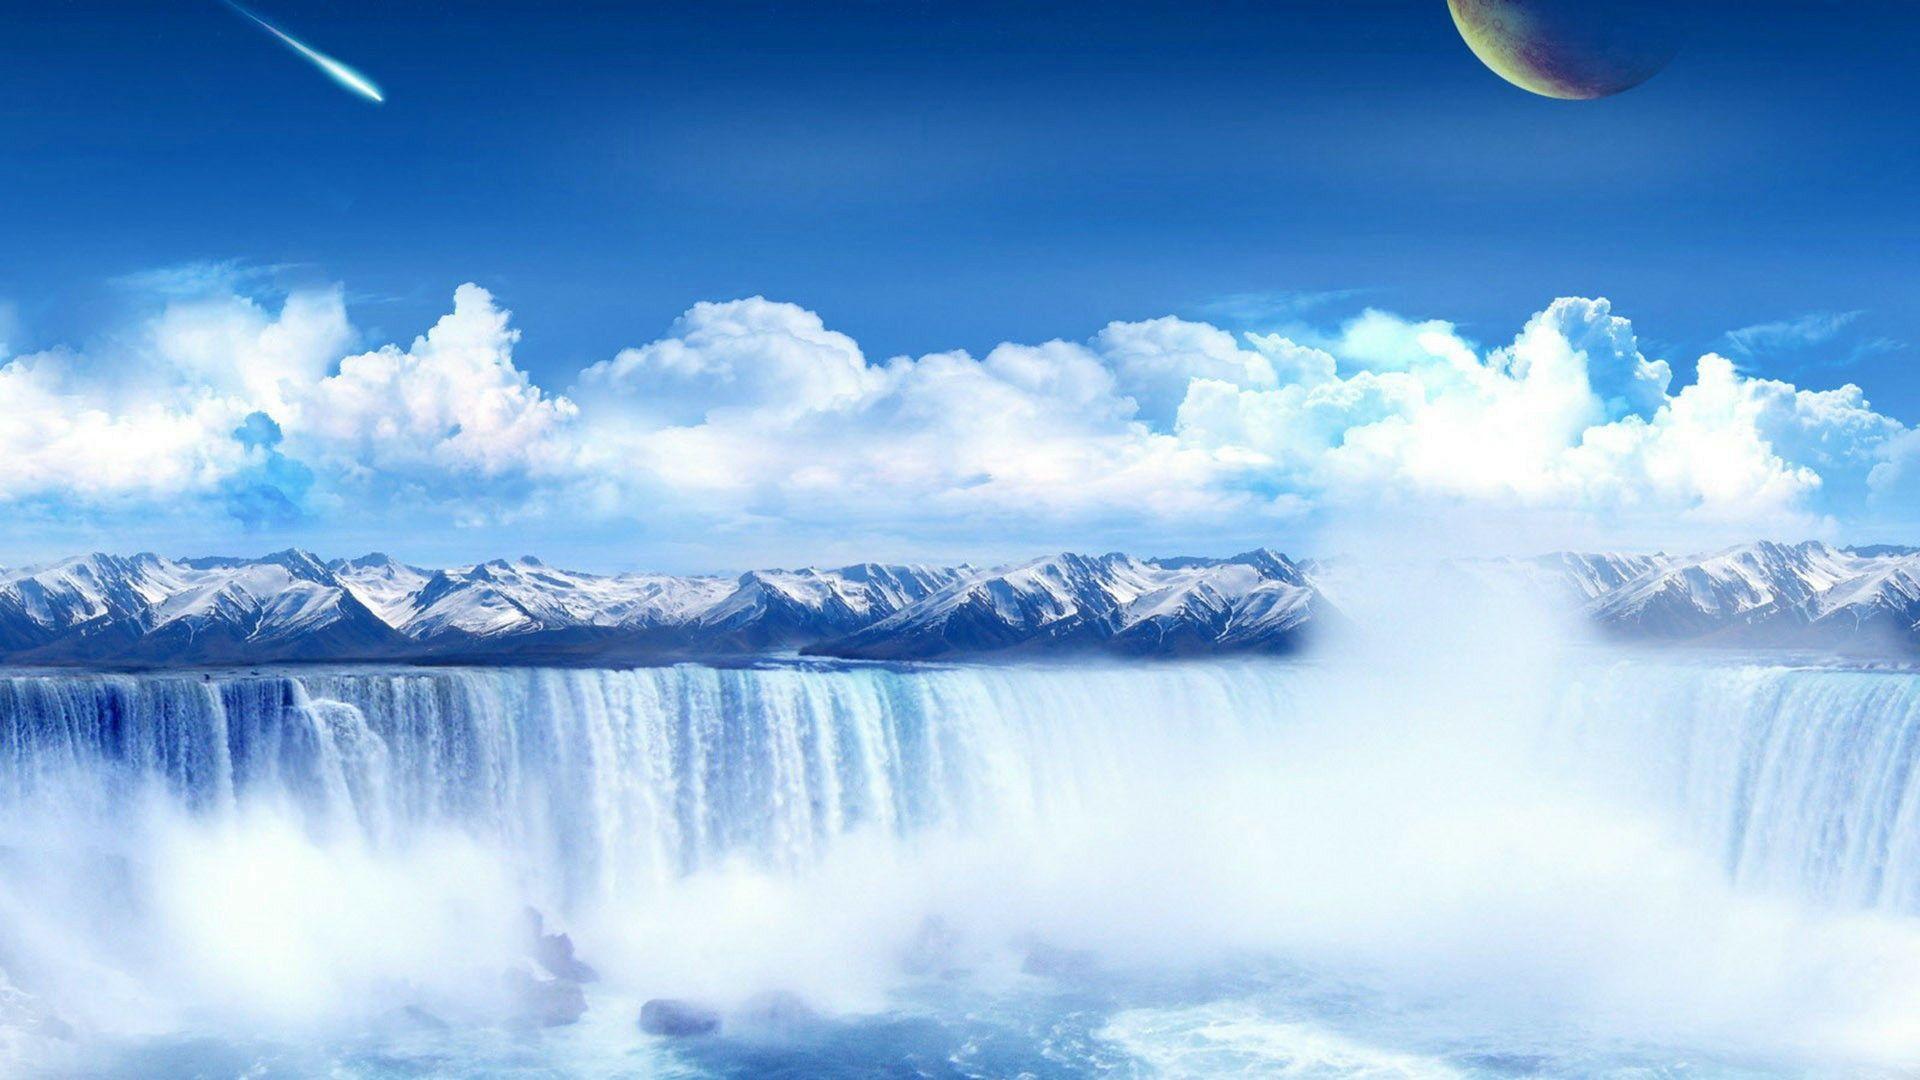 Hd 1920x1080 Cool Waterfall And Planet Desktop Wallpaper Background